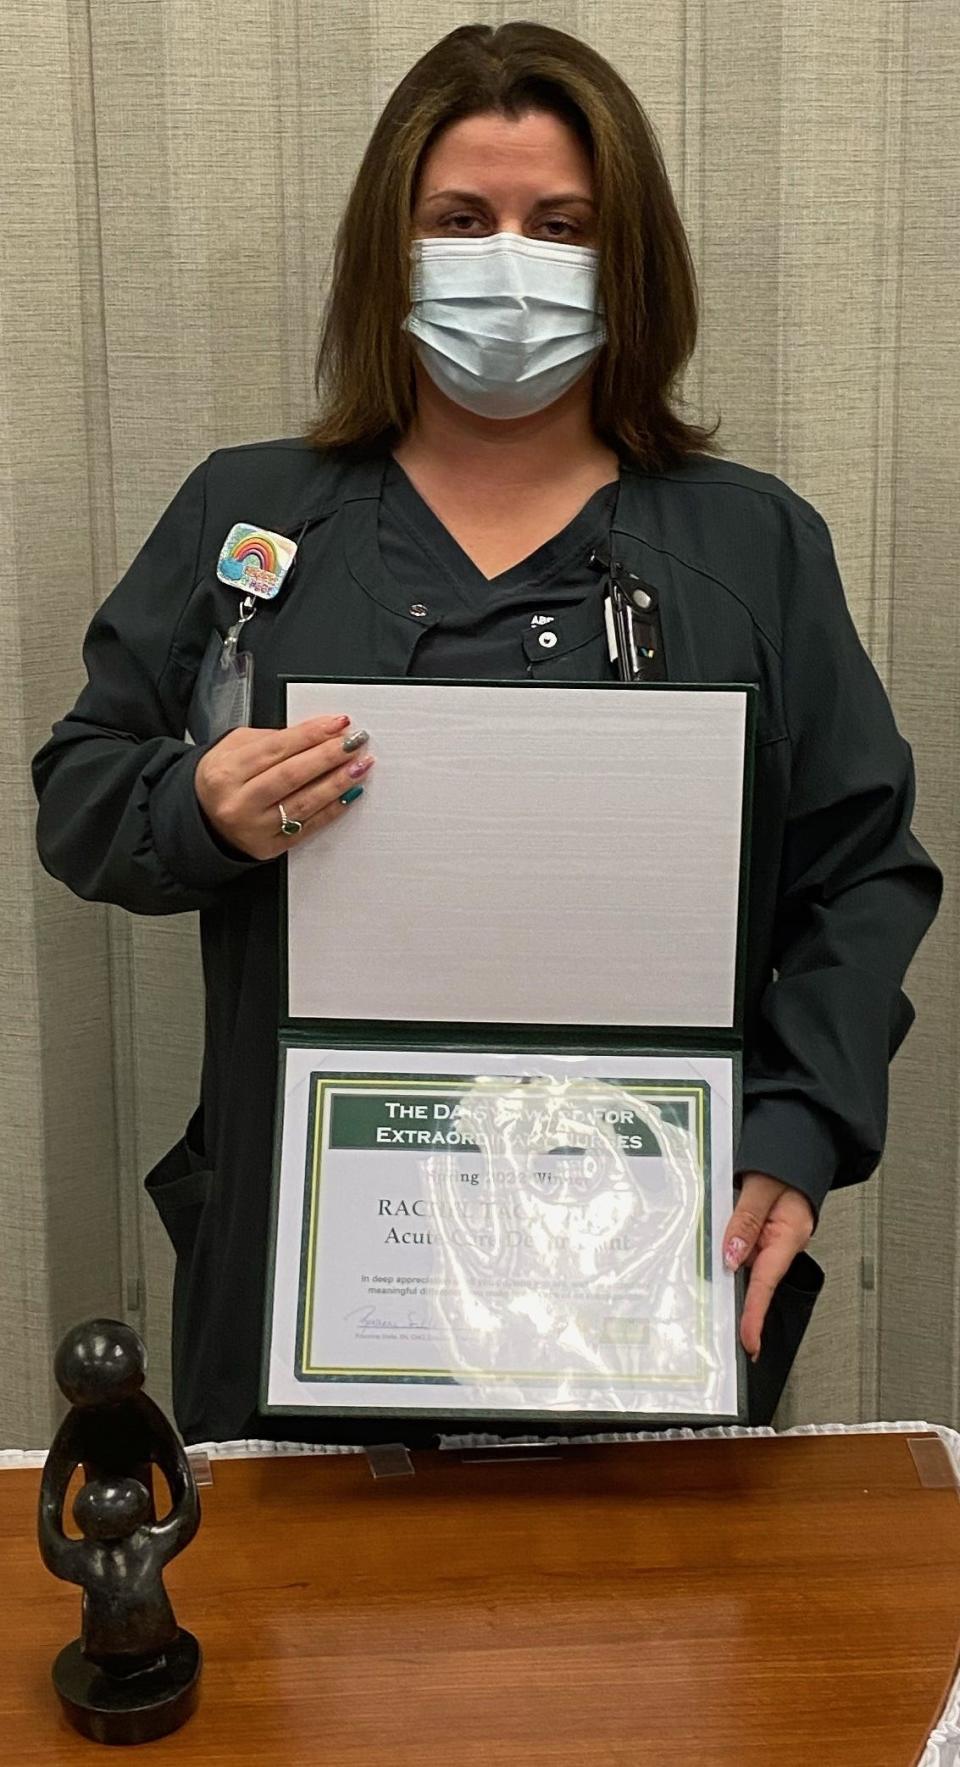 Tackett is credited with serving as an excellent patient advocate and coordinating pain medication administration between the pharmacy and the patient’s clinical care team to ensure the patient received safe and quality care.